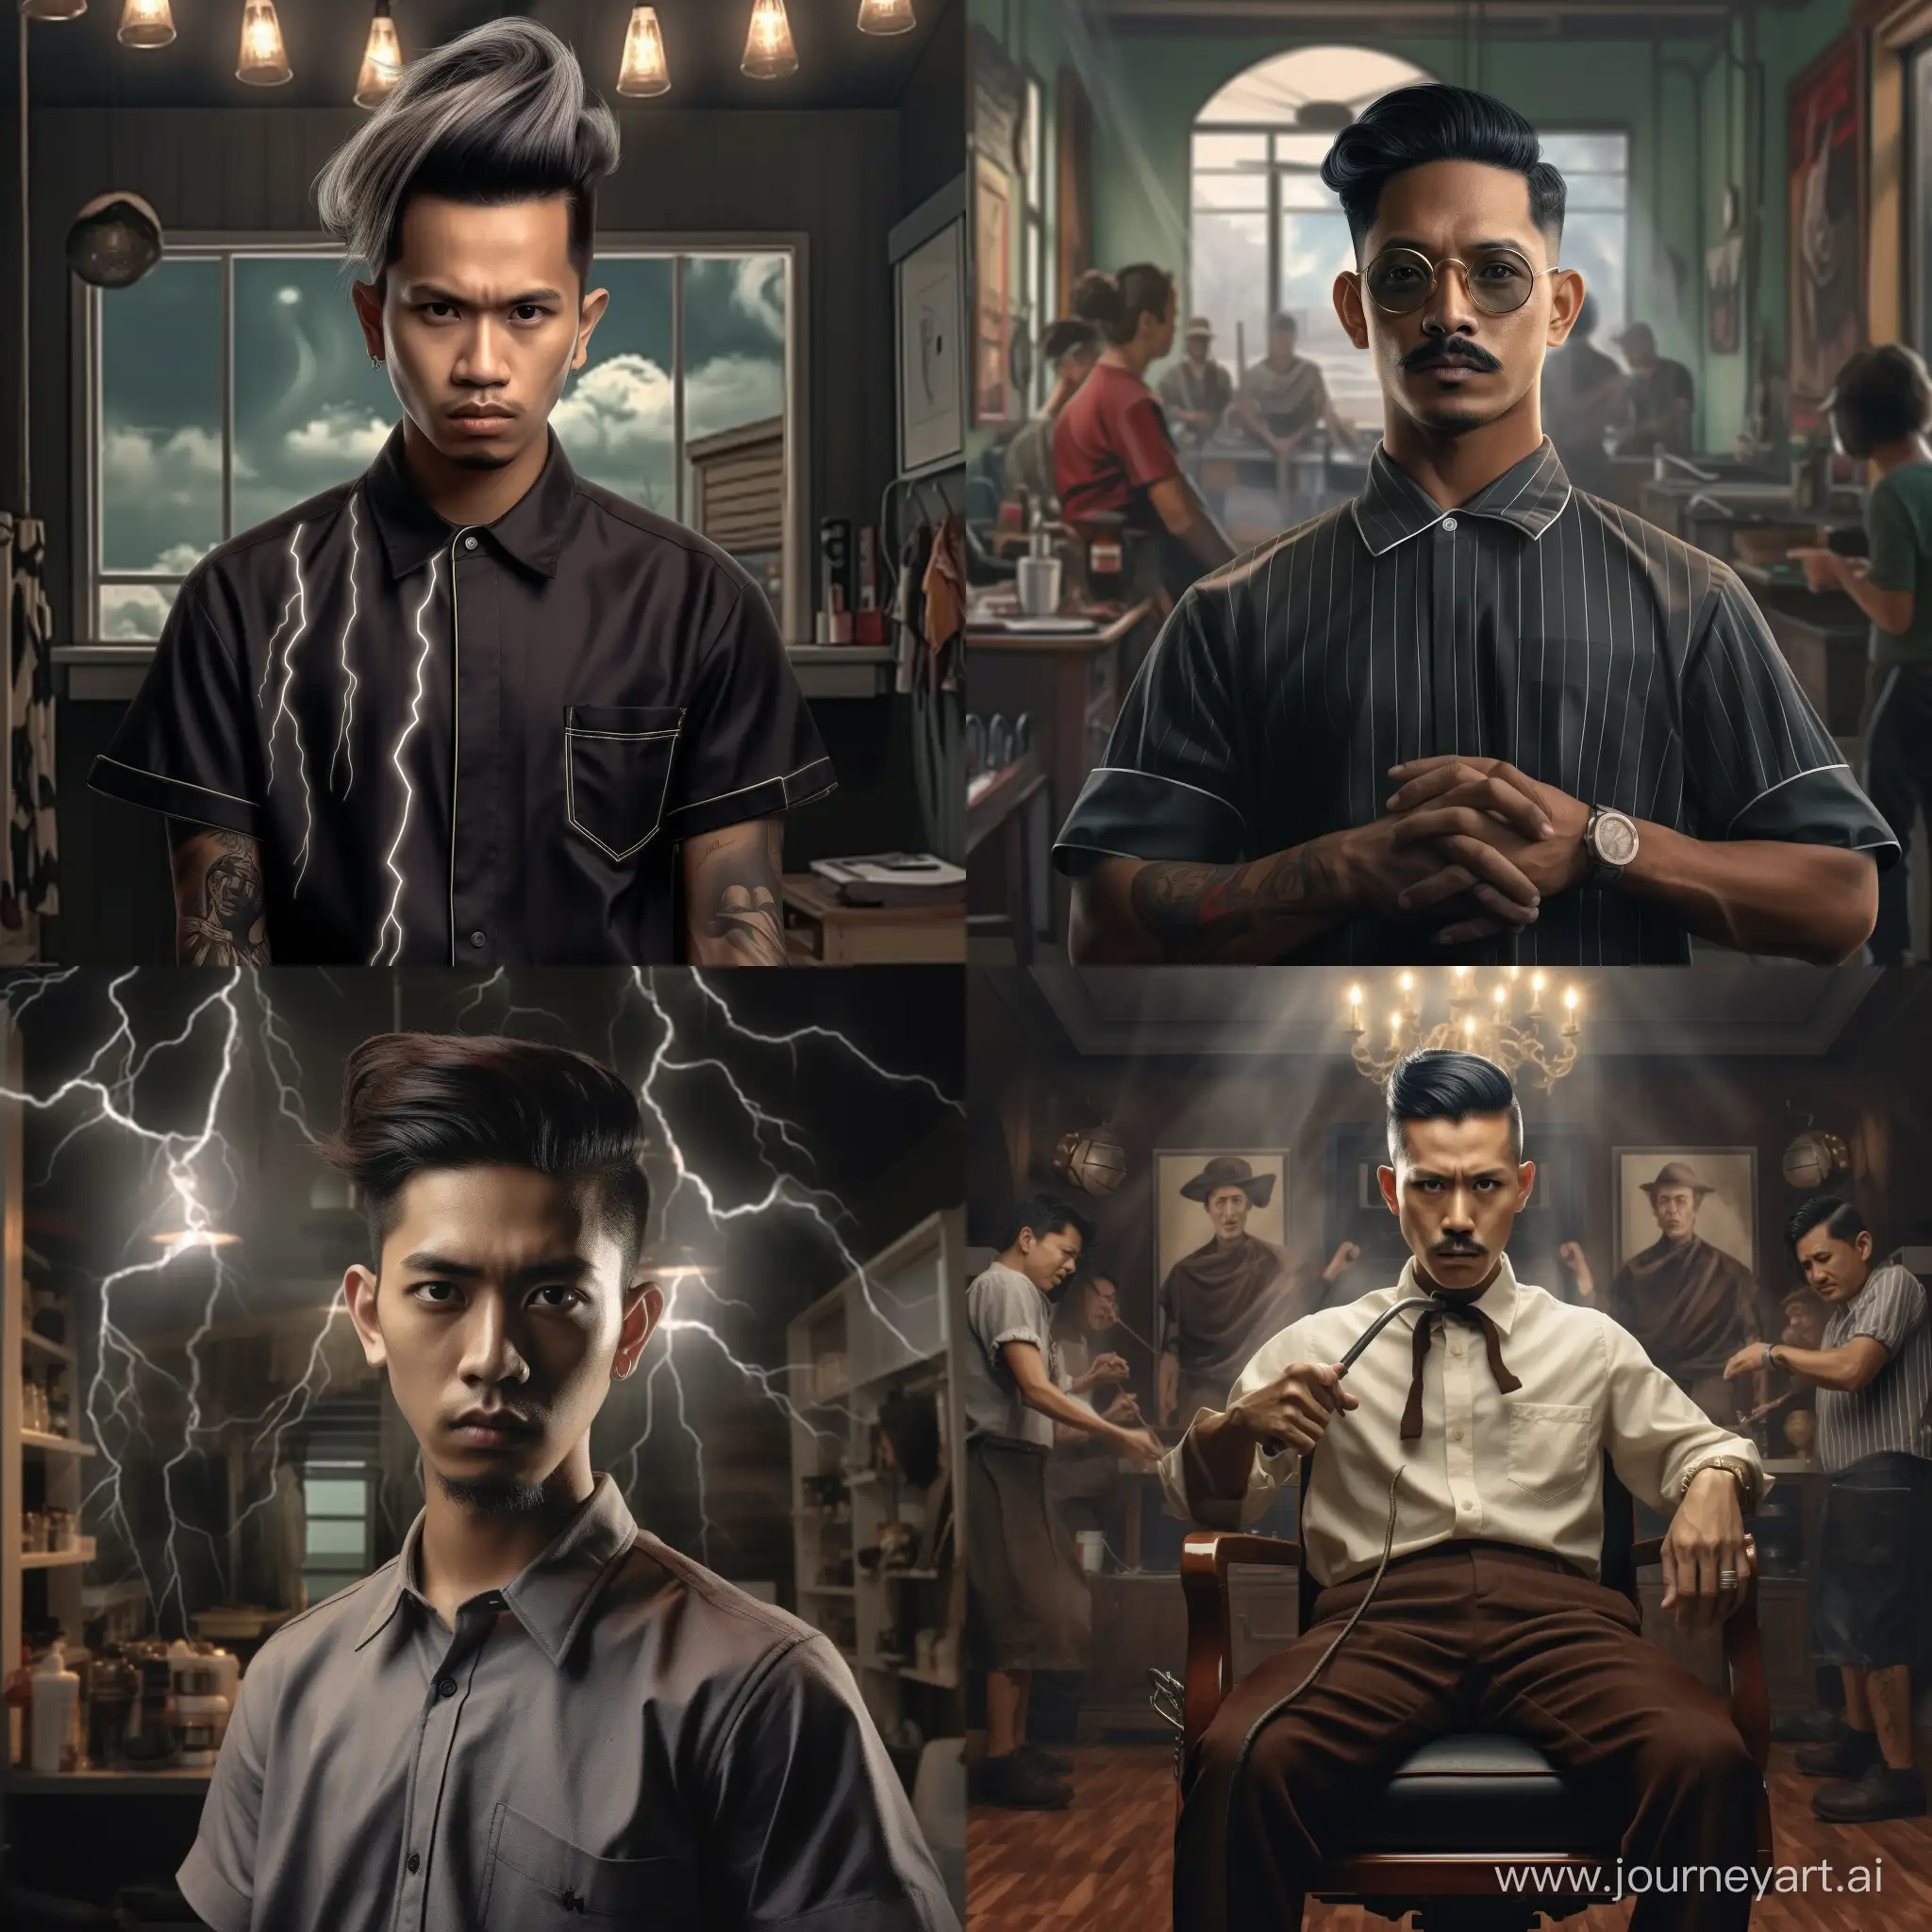 Indonesian-Cool-Handsome-Man-at-Barbershop-with-Dramatic-Lighting